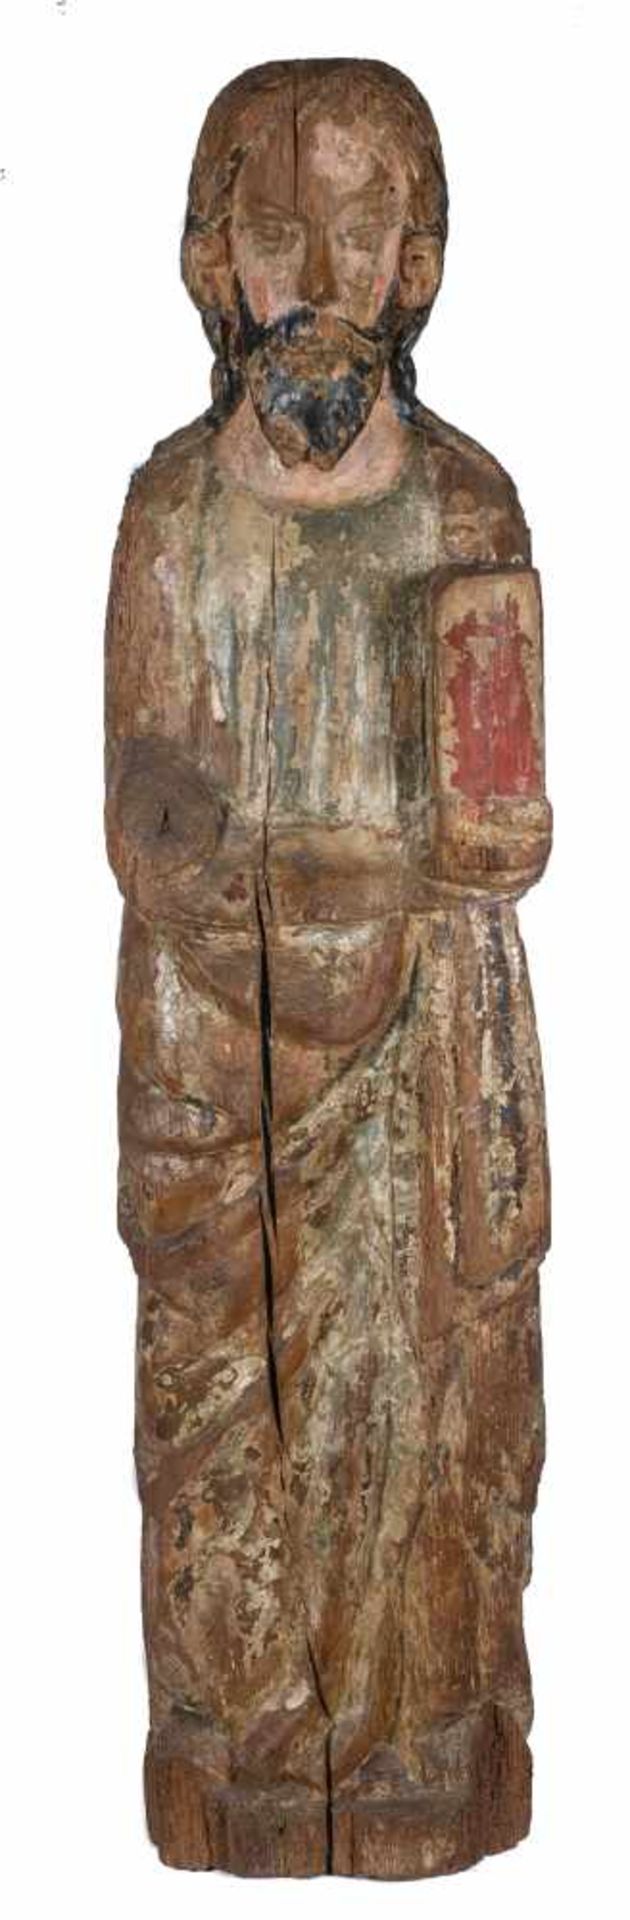 Saint. Carved and polychromed wooden sculpture. Romanesque. Catalan School. 13th century.